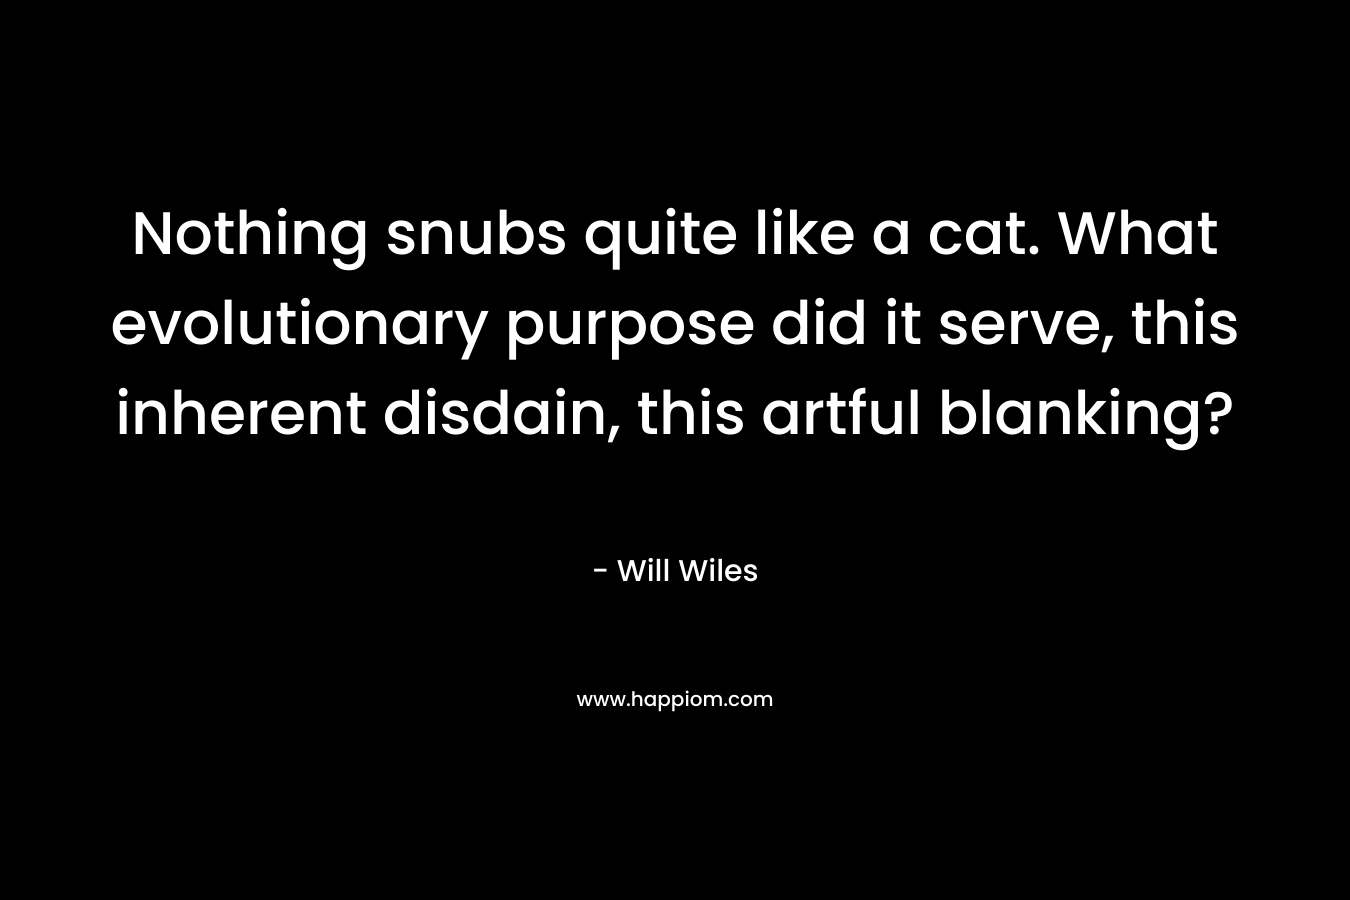 Nothing snubs quite like a cat. What evolutionary purpose did it serve, this inherent disdain, this artful blanking? – Will Wiles